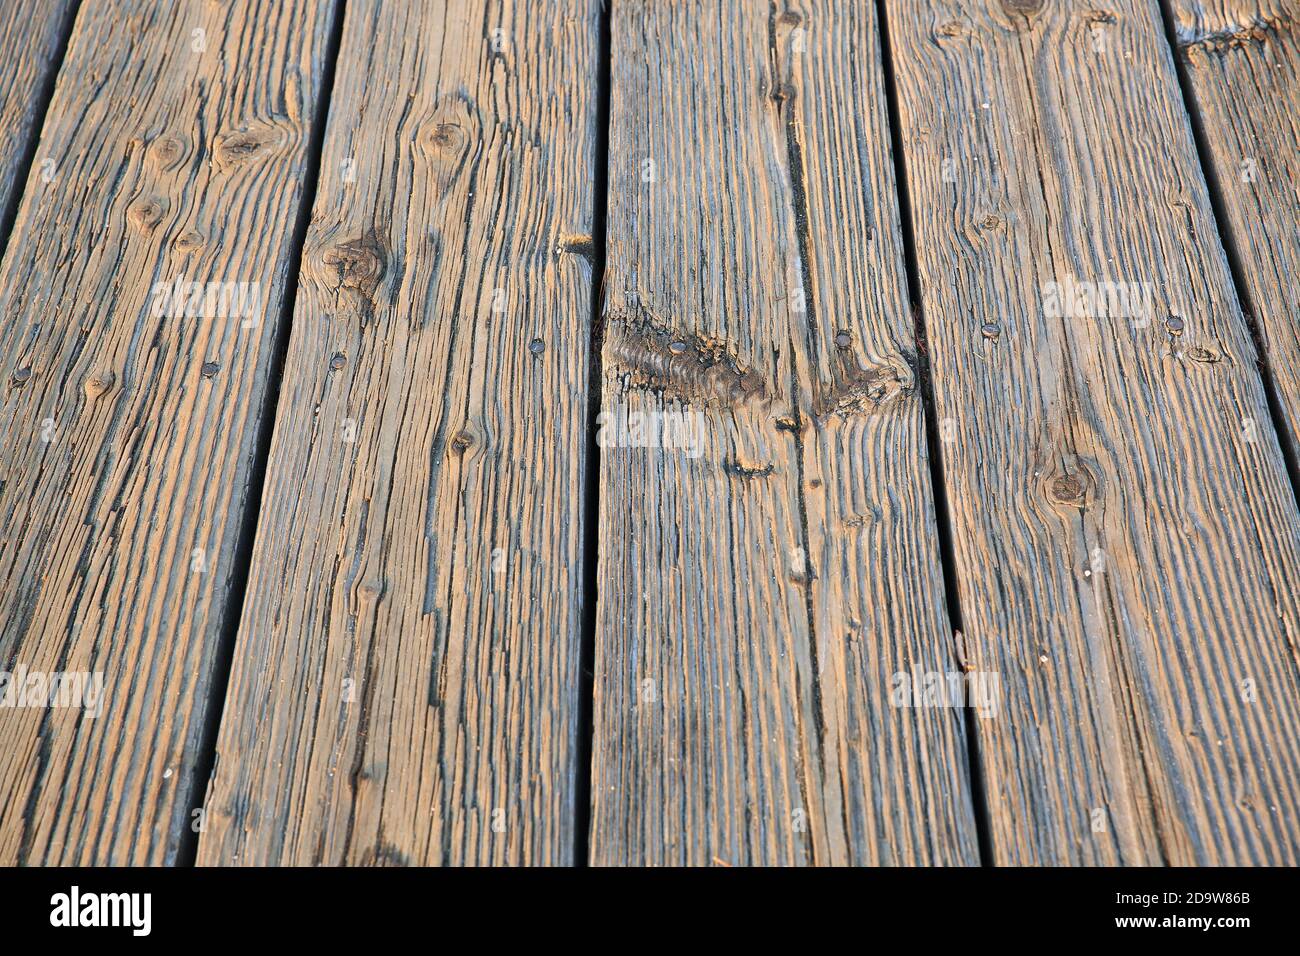 High angle view of wooden deck Stock Photo